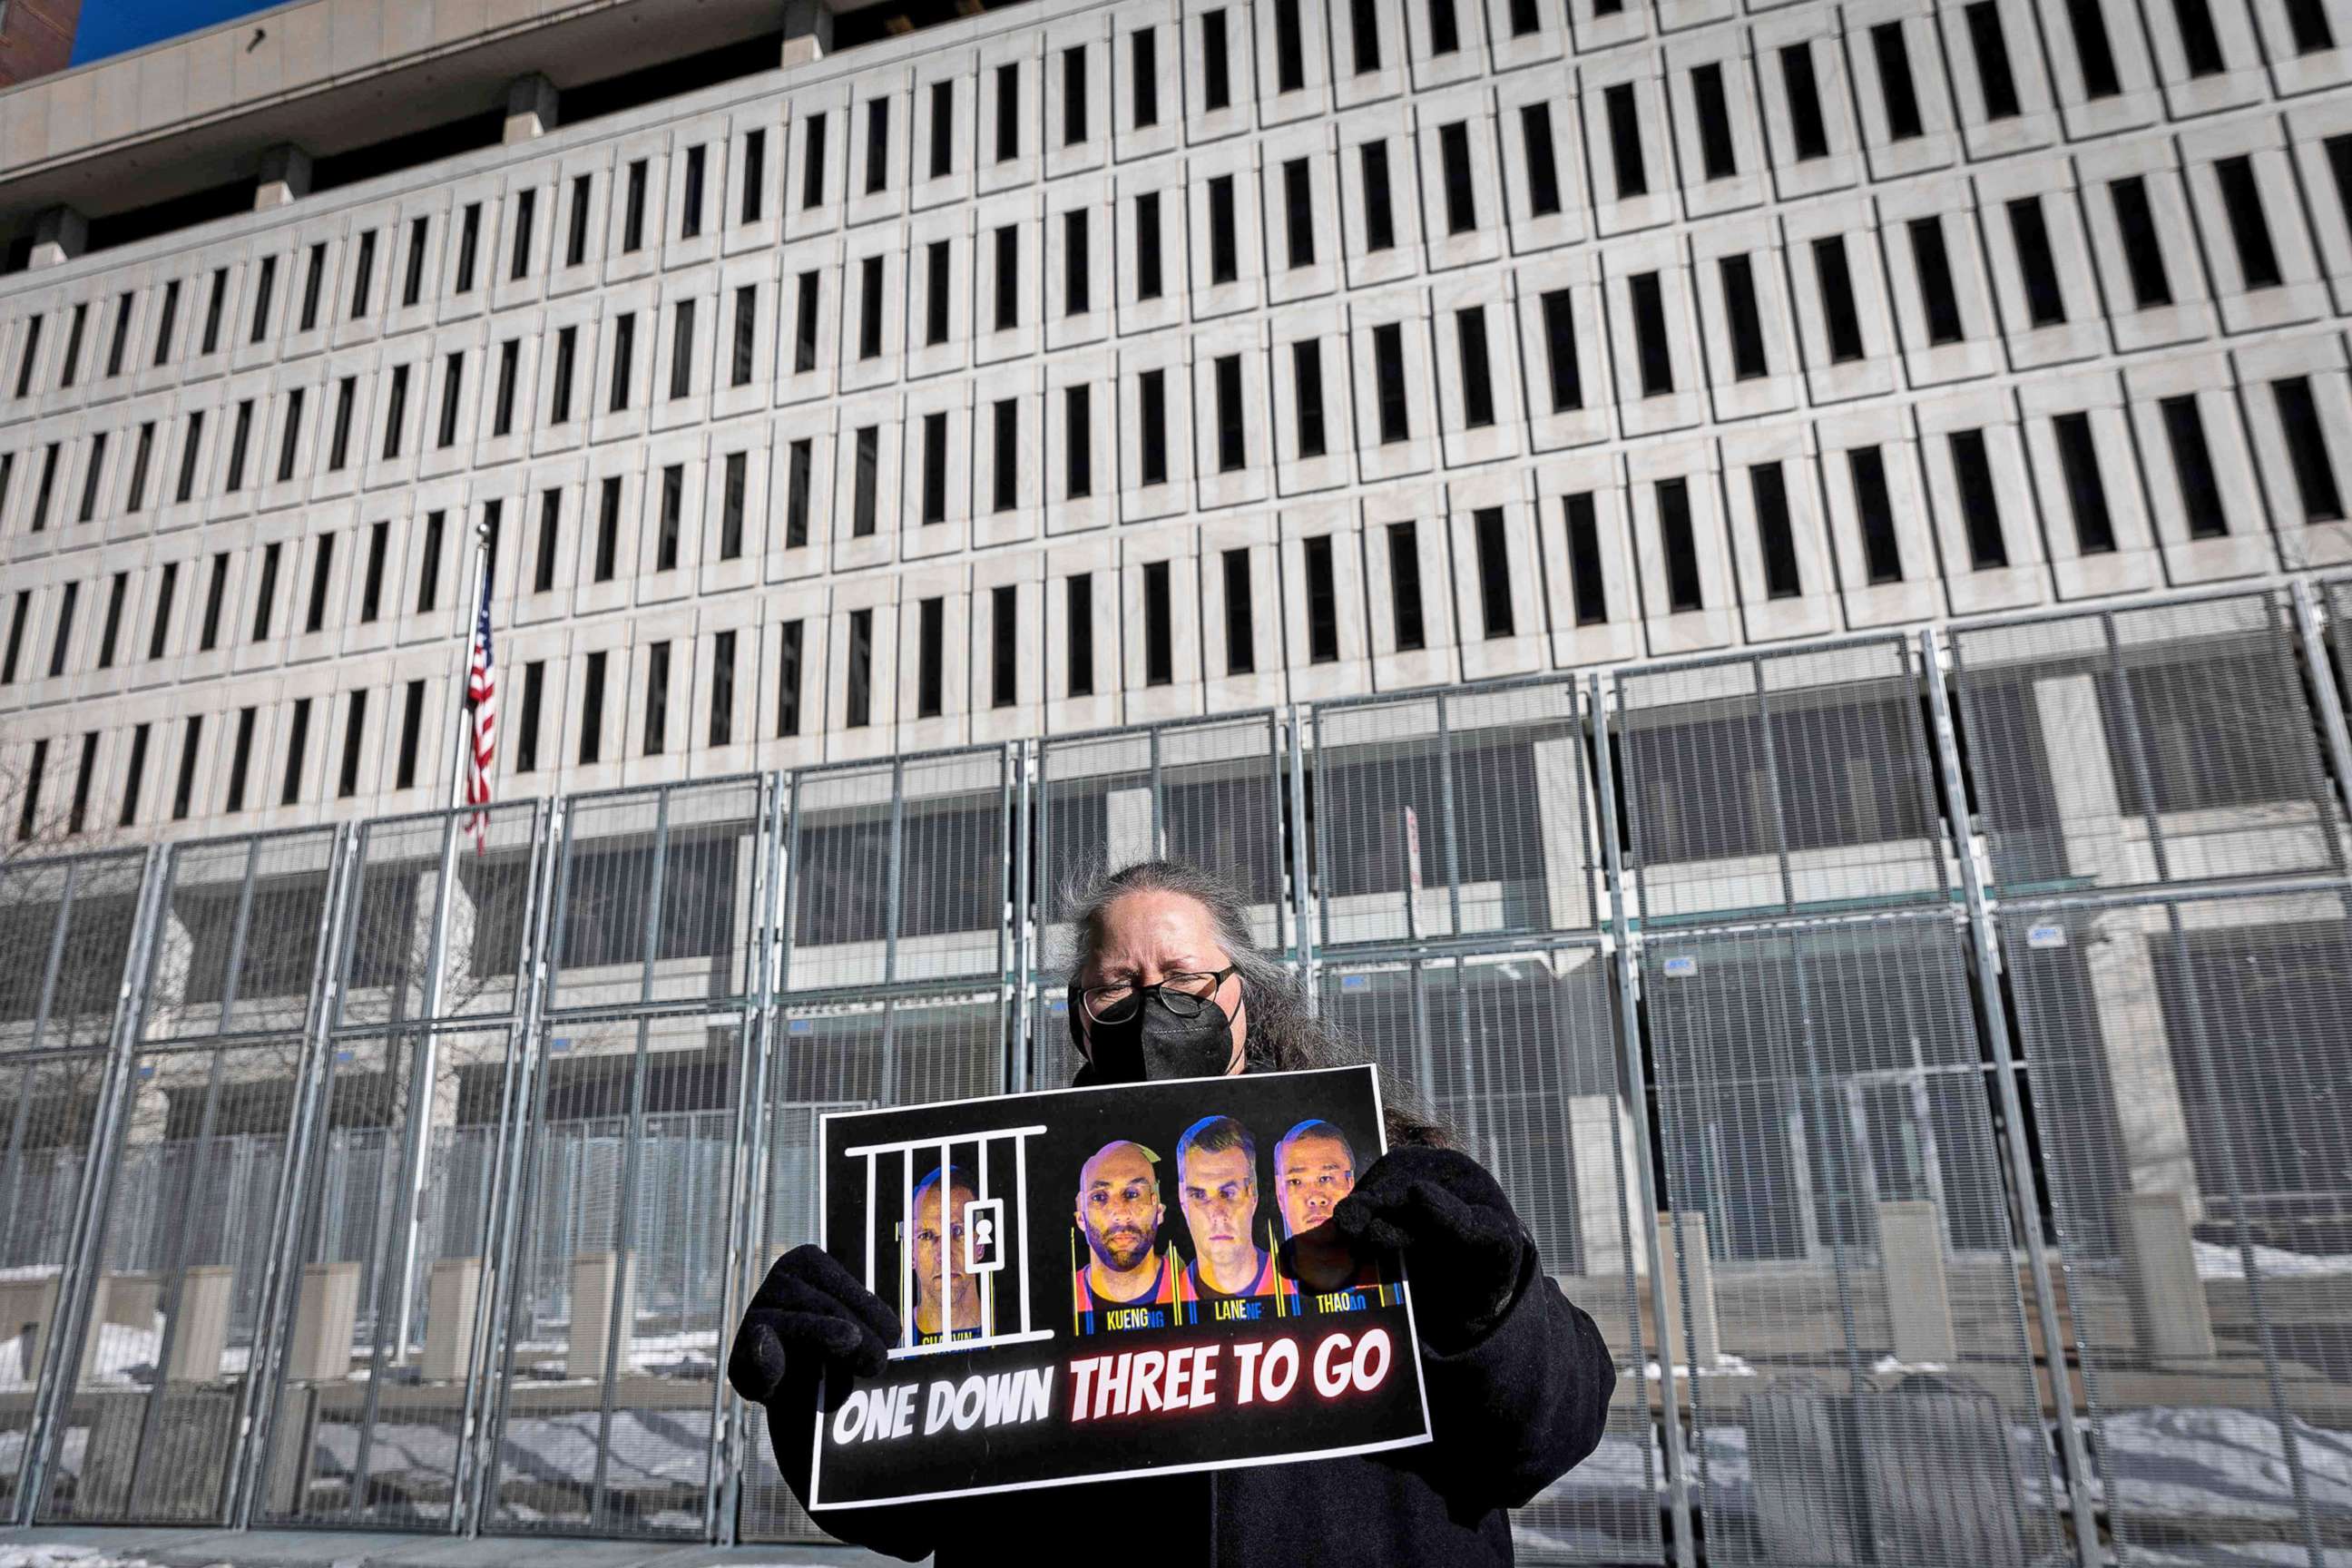 PHOTO: A community activist holds a placard during press conference outside the U.S. District Court in St. Paul, Minn., on Jan. 20, 2022, for the jury selection of former police officers charged with federal civil rights violations in George Floyd's death